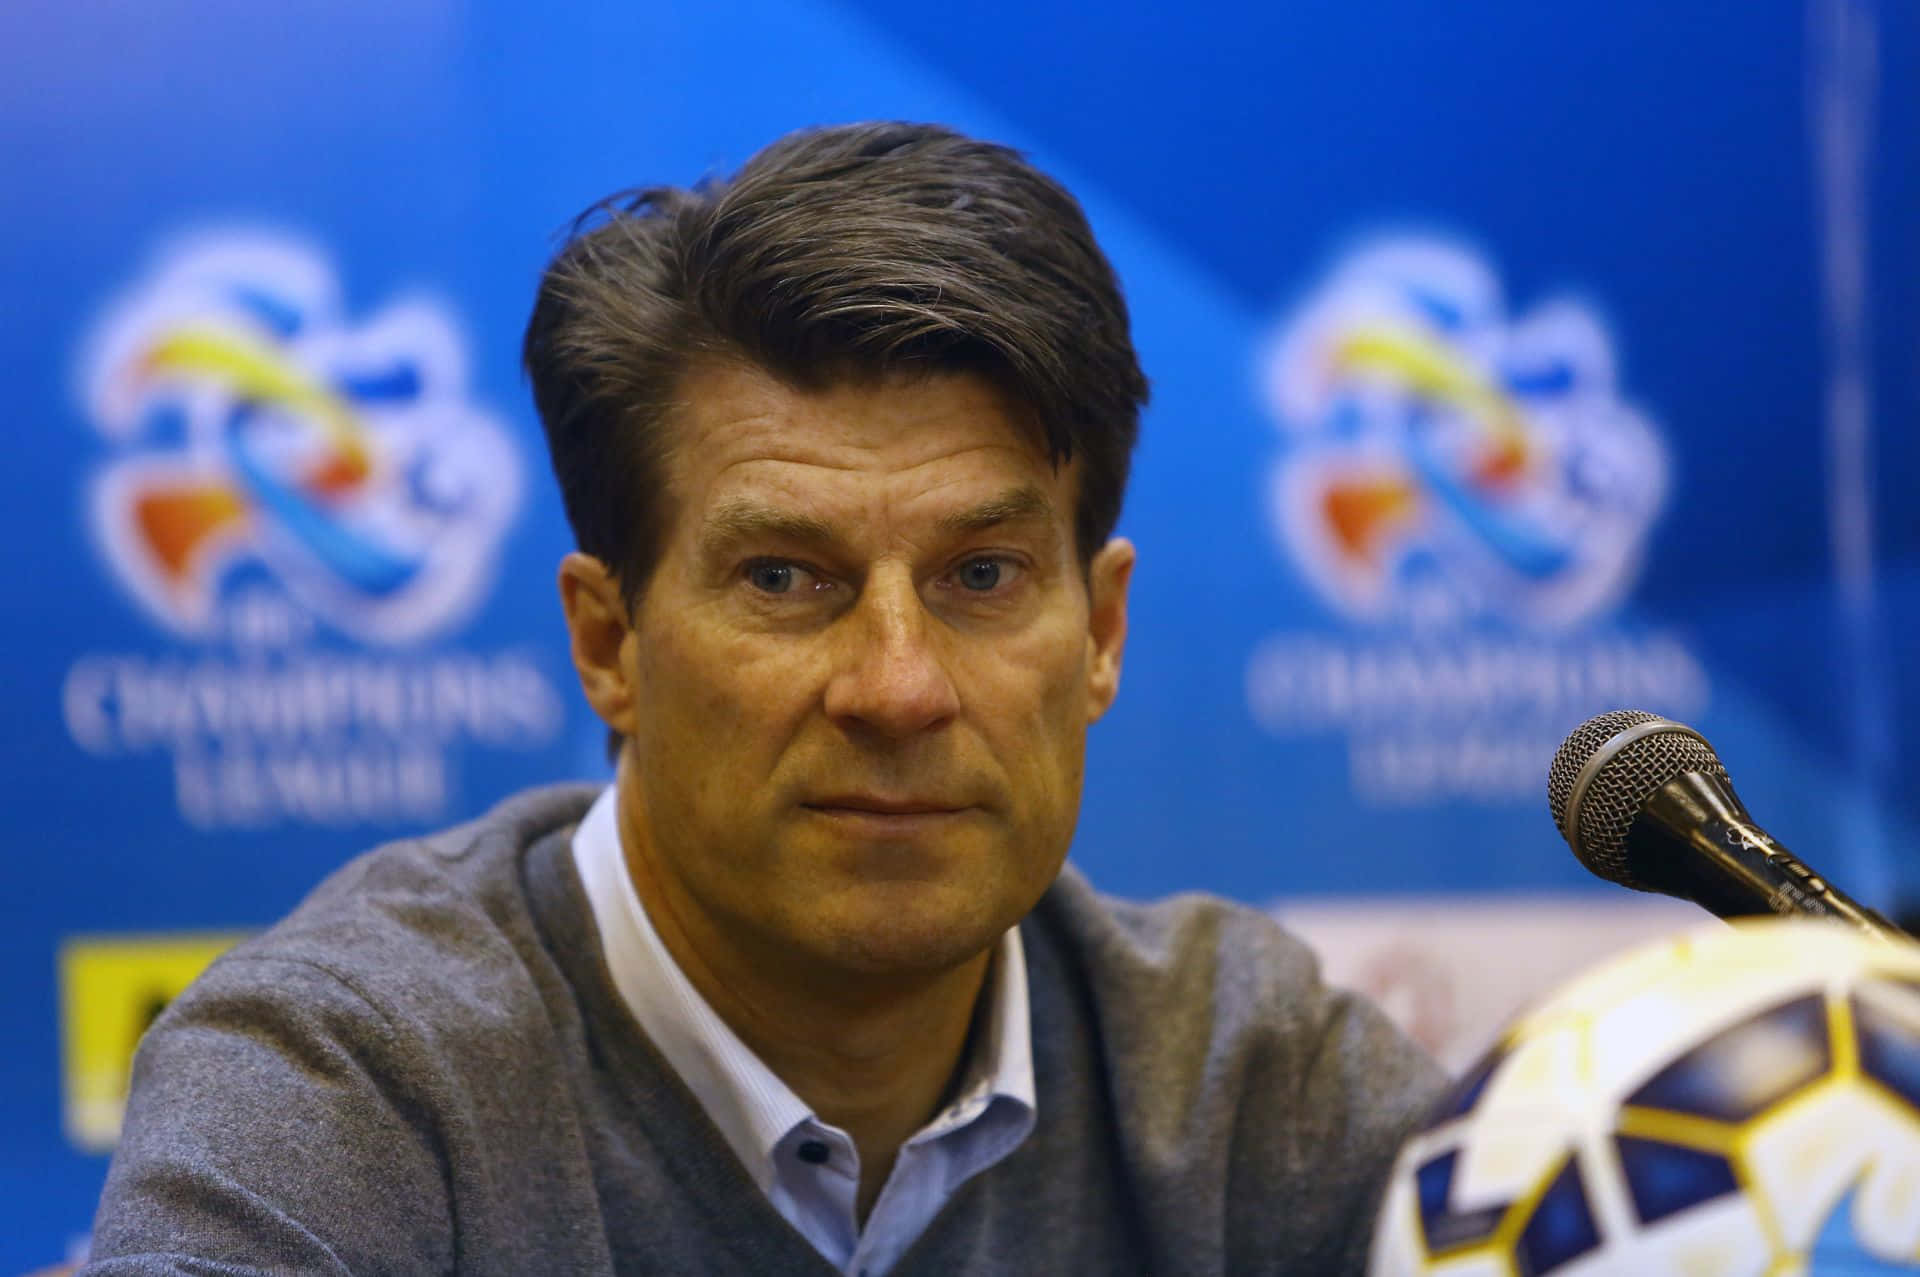 Michael Laudrup Press Conference For Champions League Wallpaper